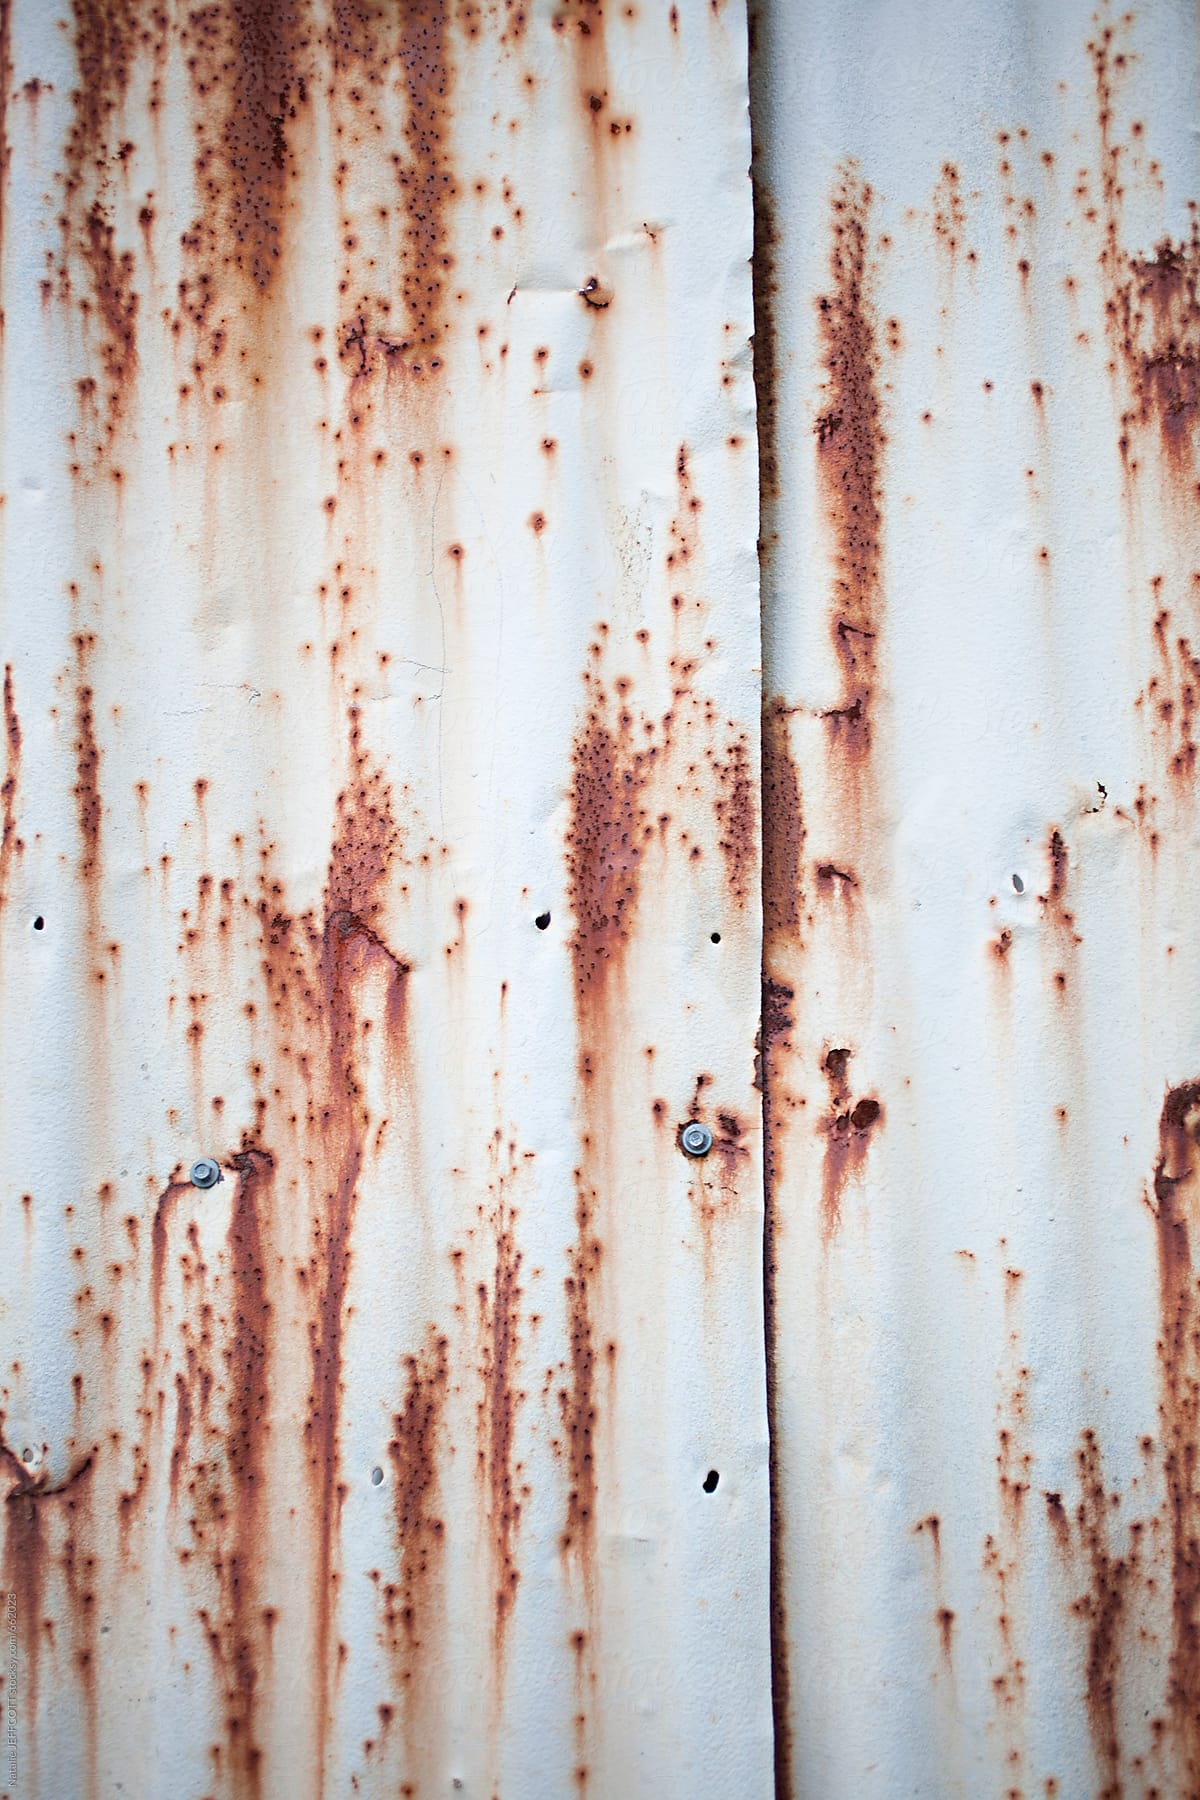 beautiful textured, old and weathered patina on corrugated tin sheds and fences